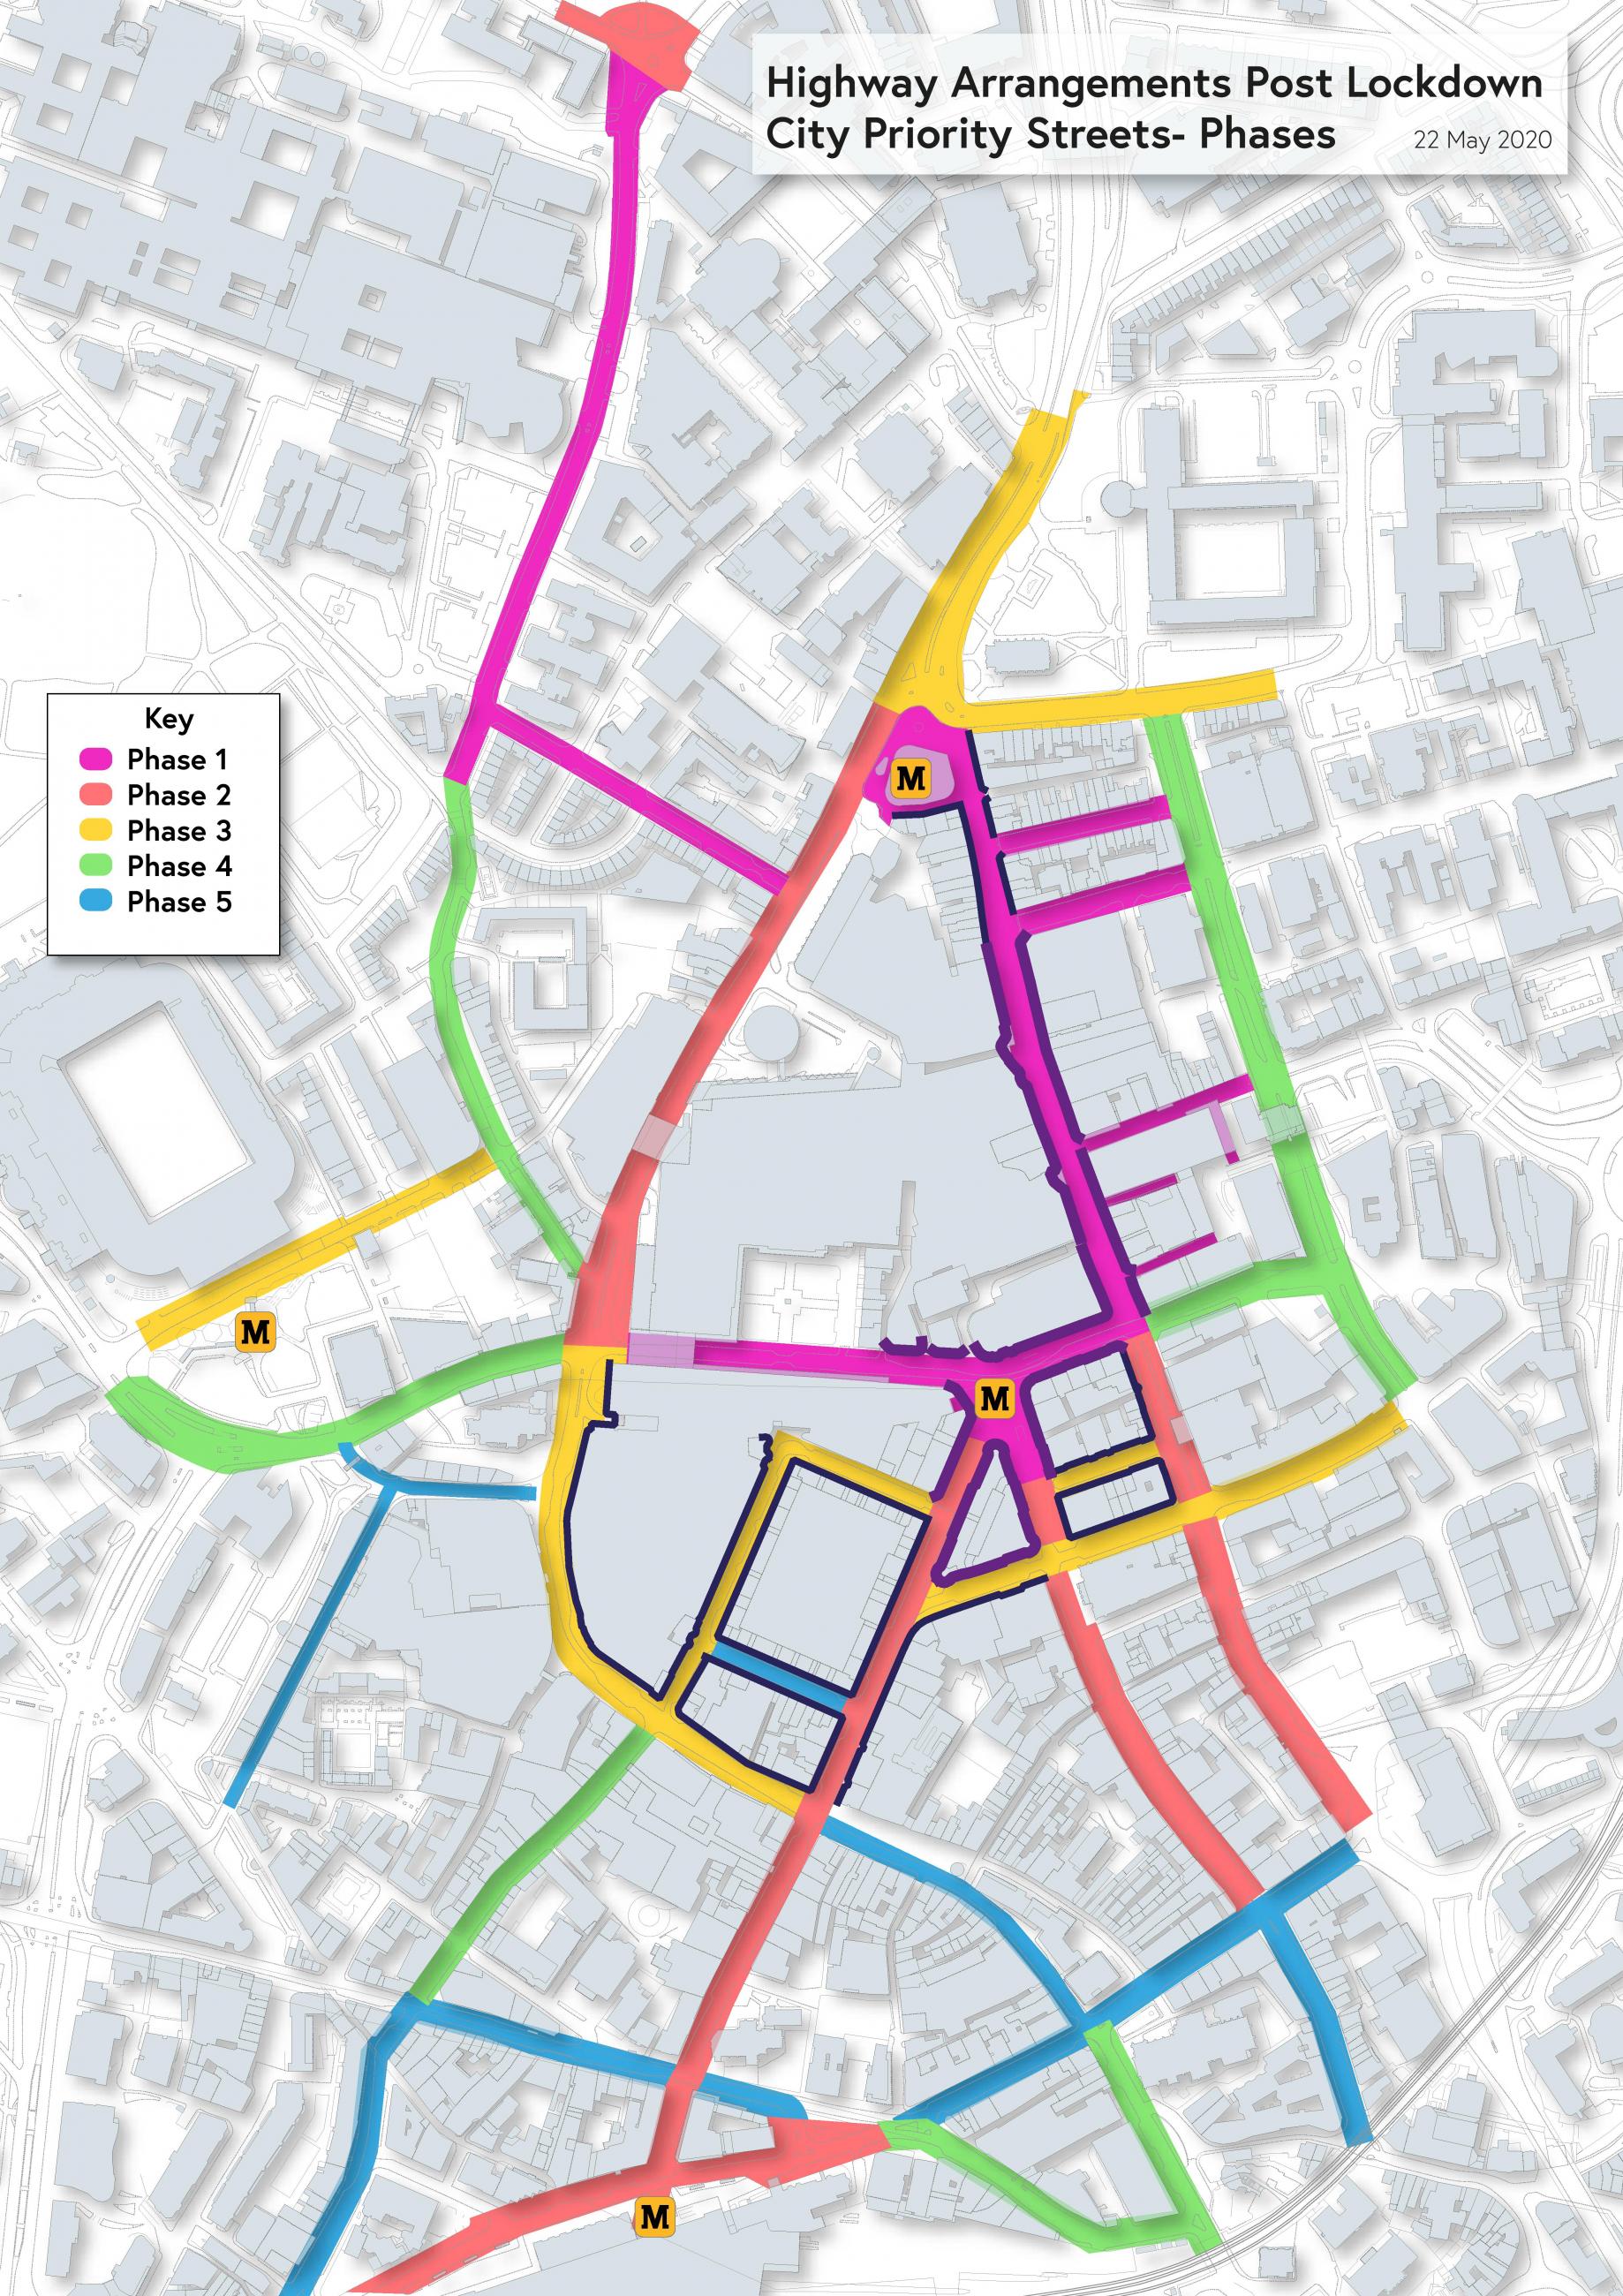 Black and white map showing city centre streets with some in different colours to indicate different phases of work.